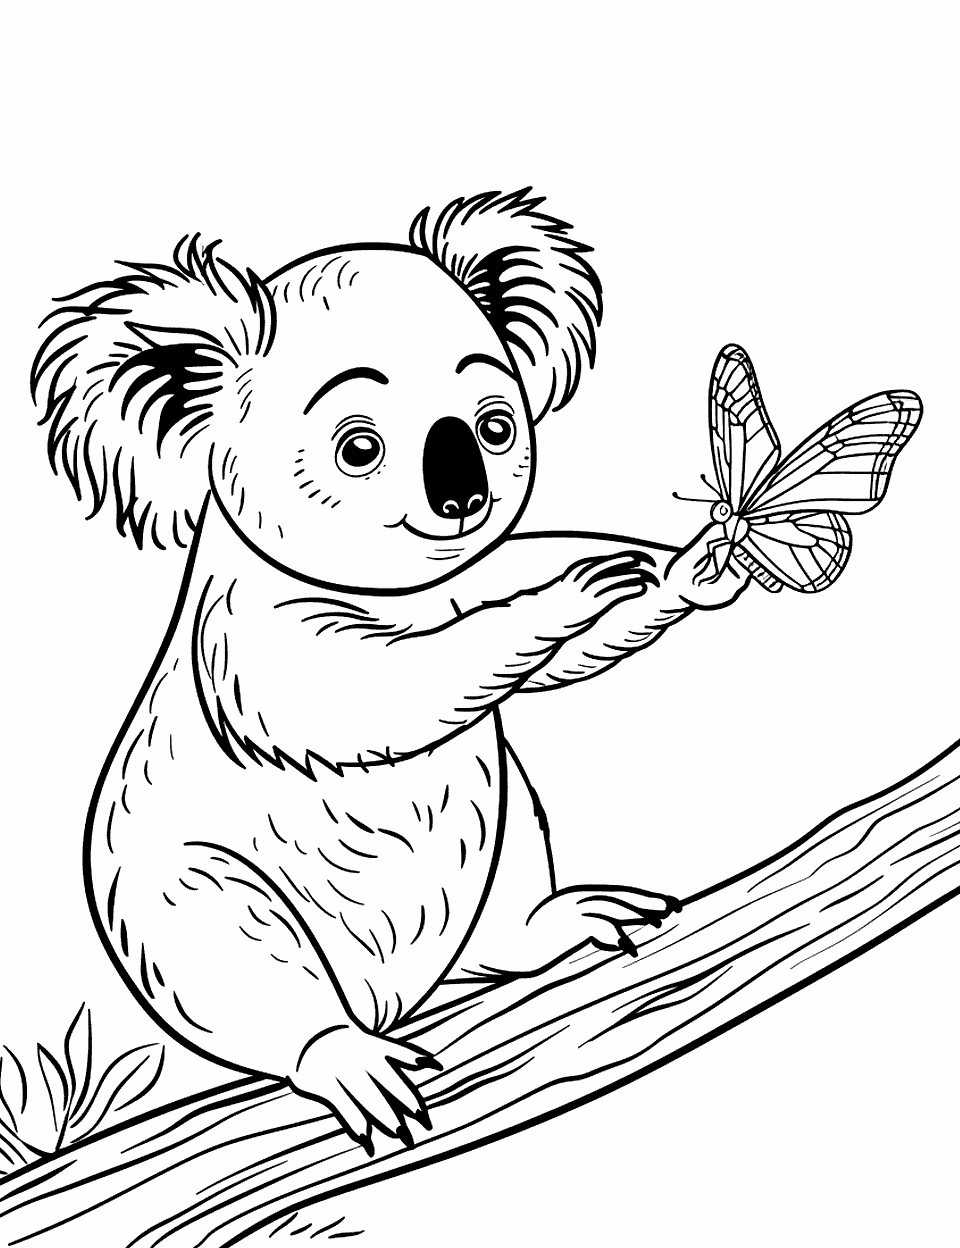 Koala and a Butterfly Coloring Page - A koala reaching out curiously towards a fluttering butterfly nearby.